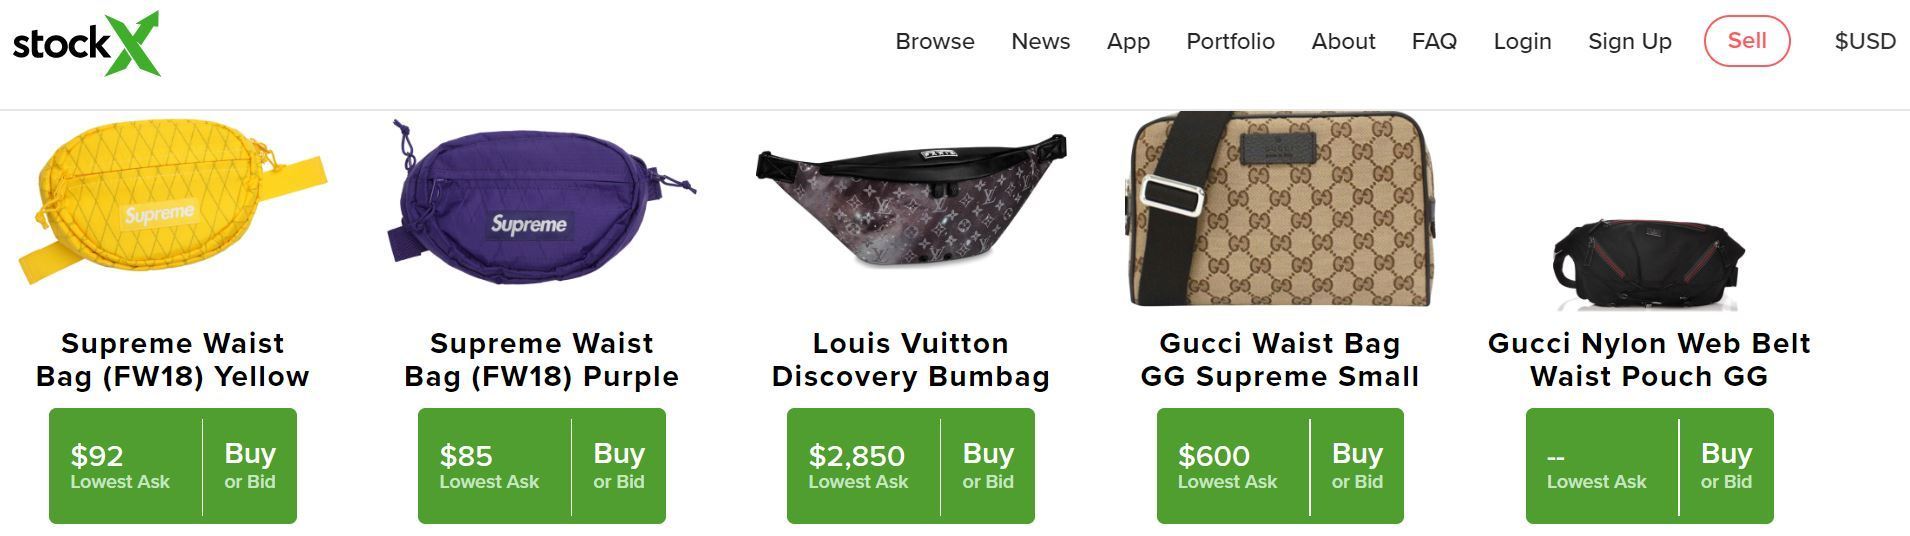 Places to Buy Fanny Packs - StockX